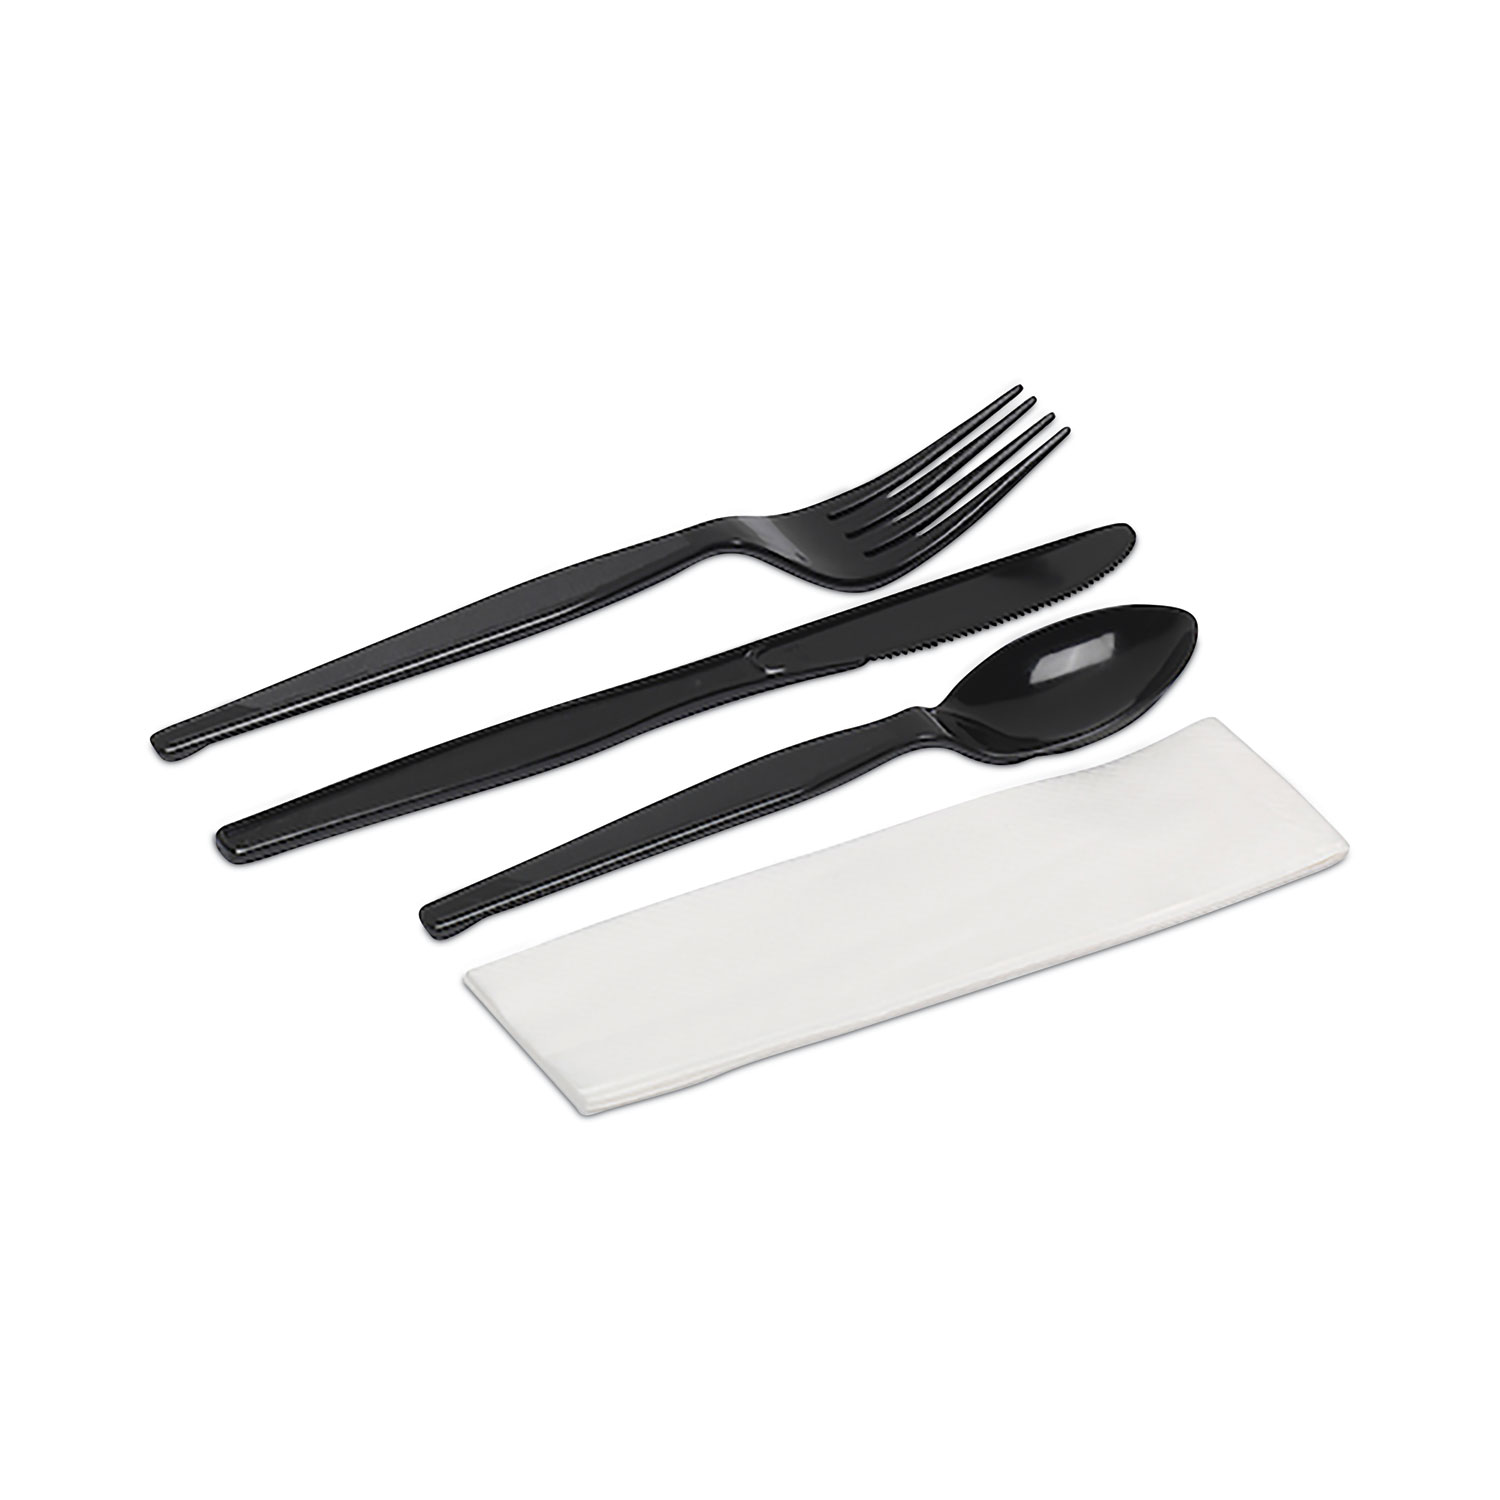 Solo Cup Guildware Heavyweight Plastic Knives - 1 Piece(s) - 1000/Carton -  Knife - 1 x Knife - Breakroom, Steak - Disposable - Black - Reliable Paper